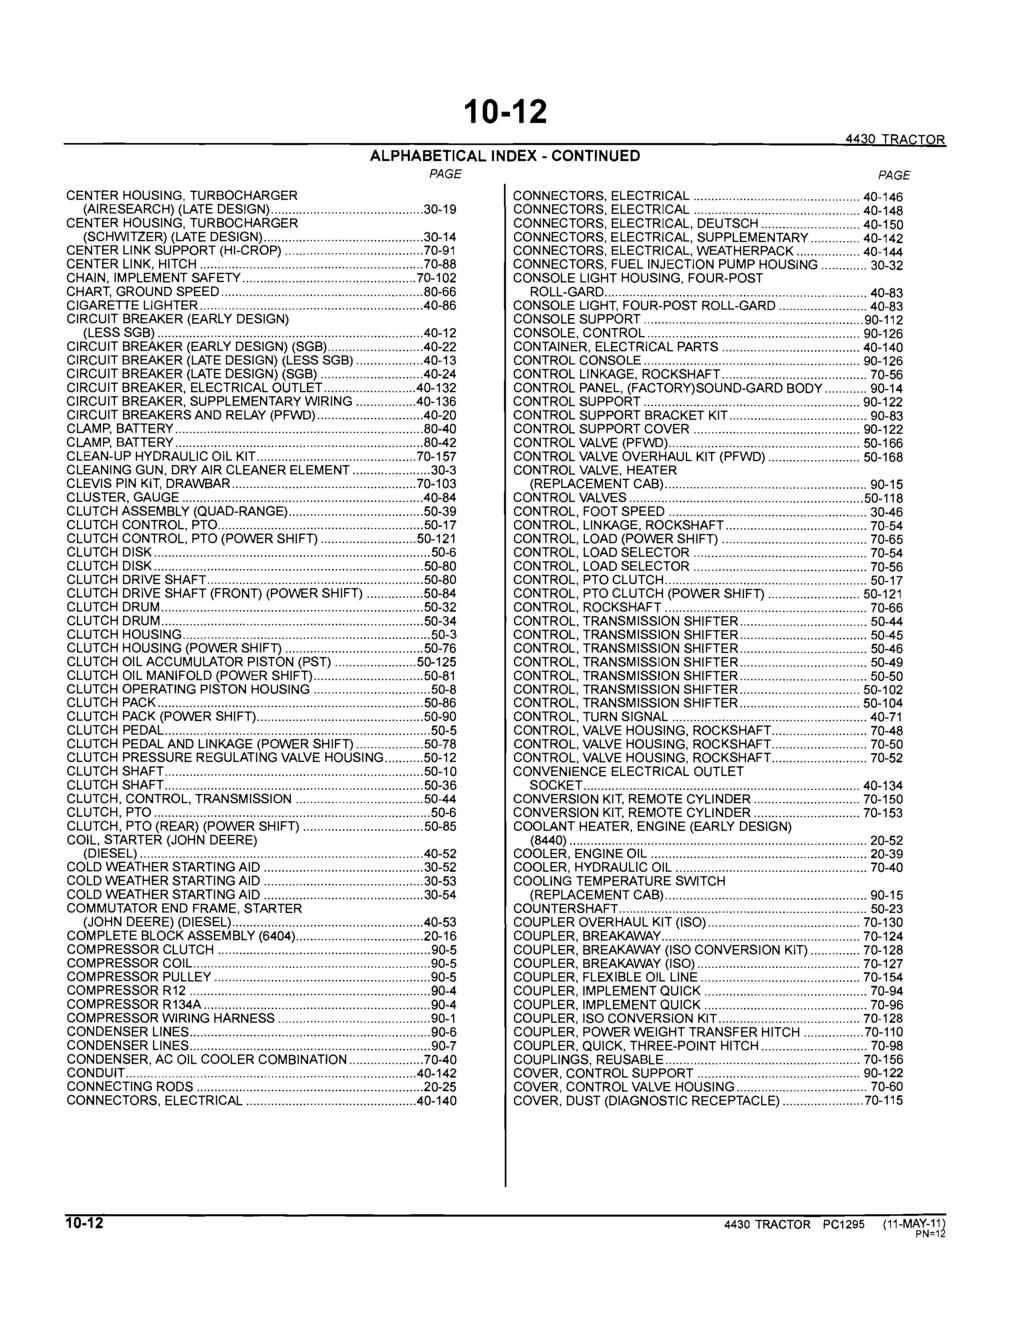 10-12 ALPHABETICAL INDEX - CONTINUED PAGE 4430 TRACTOR CENTER HOUSING, TURBOCHARGER CONNECTORS, ELECTRICAL... 40-146 (AI RESEARCH) (LATE DESIGN)... 30-19 CONNECTORS, ELECTRICAL.